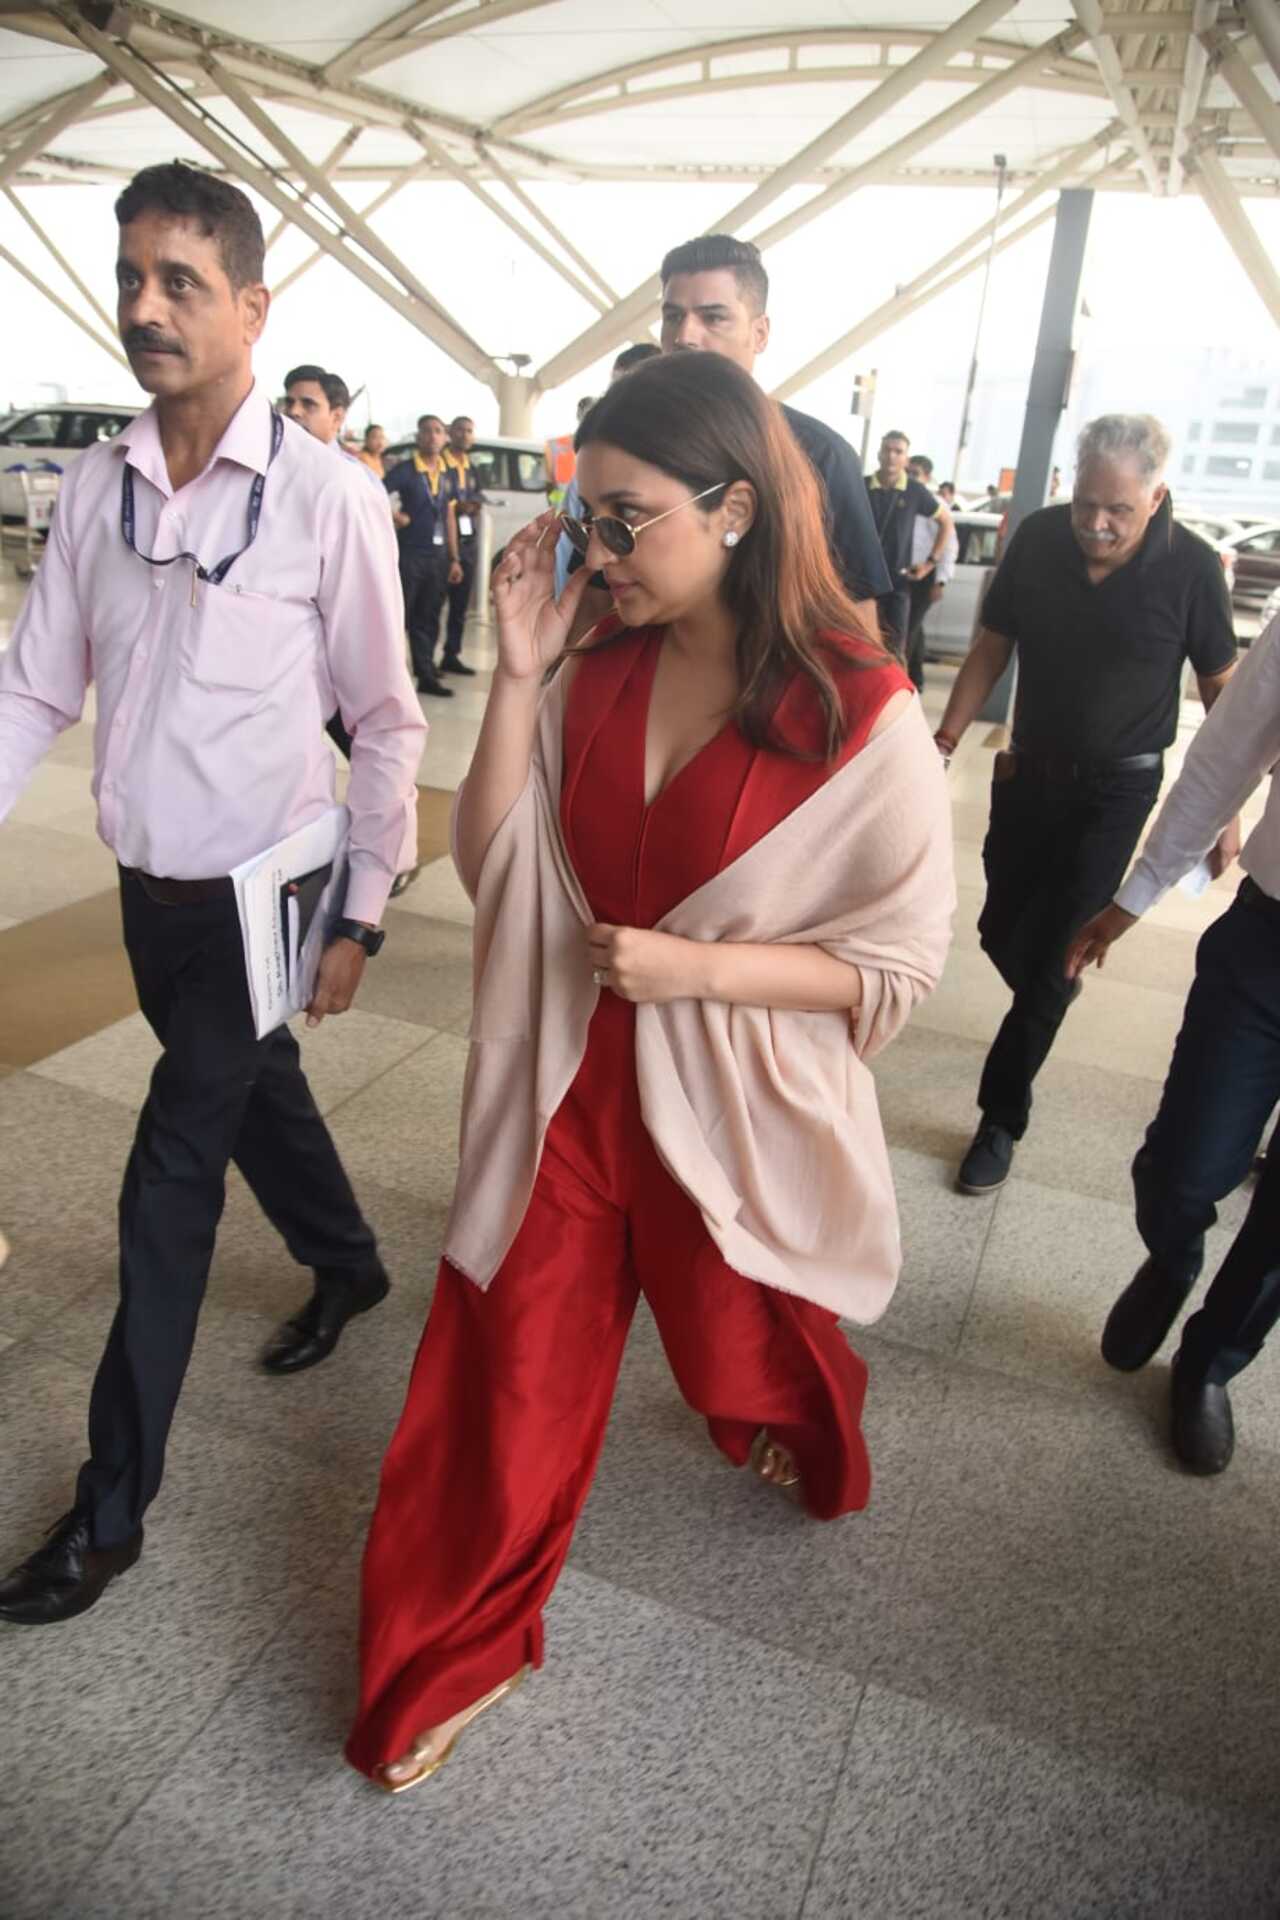 Parineeti was seen in a red jumpsuit with a peach shawl on her. She wore black shades along with her outfit. Raghav, on the other hand, was seen in a simple polo T-shirt and denims